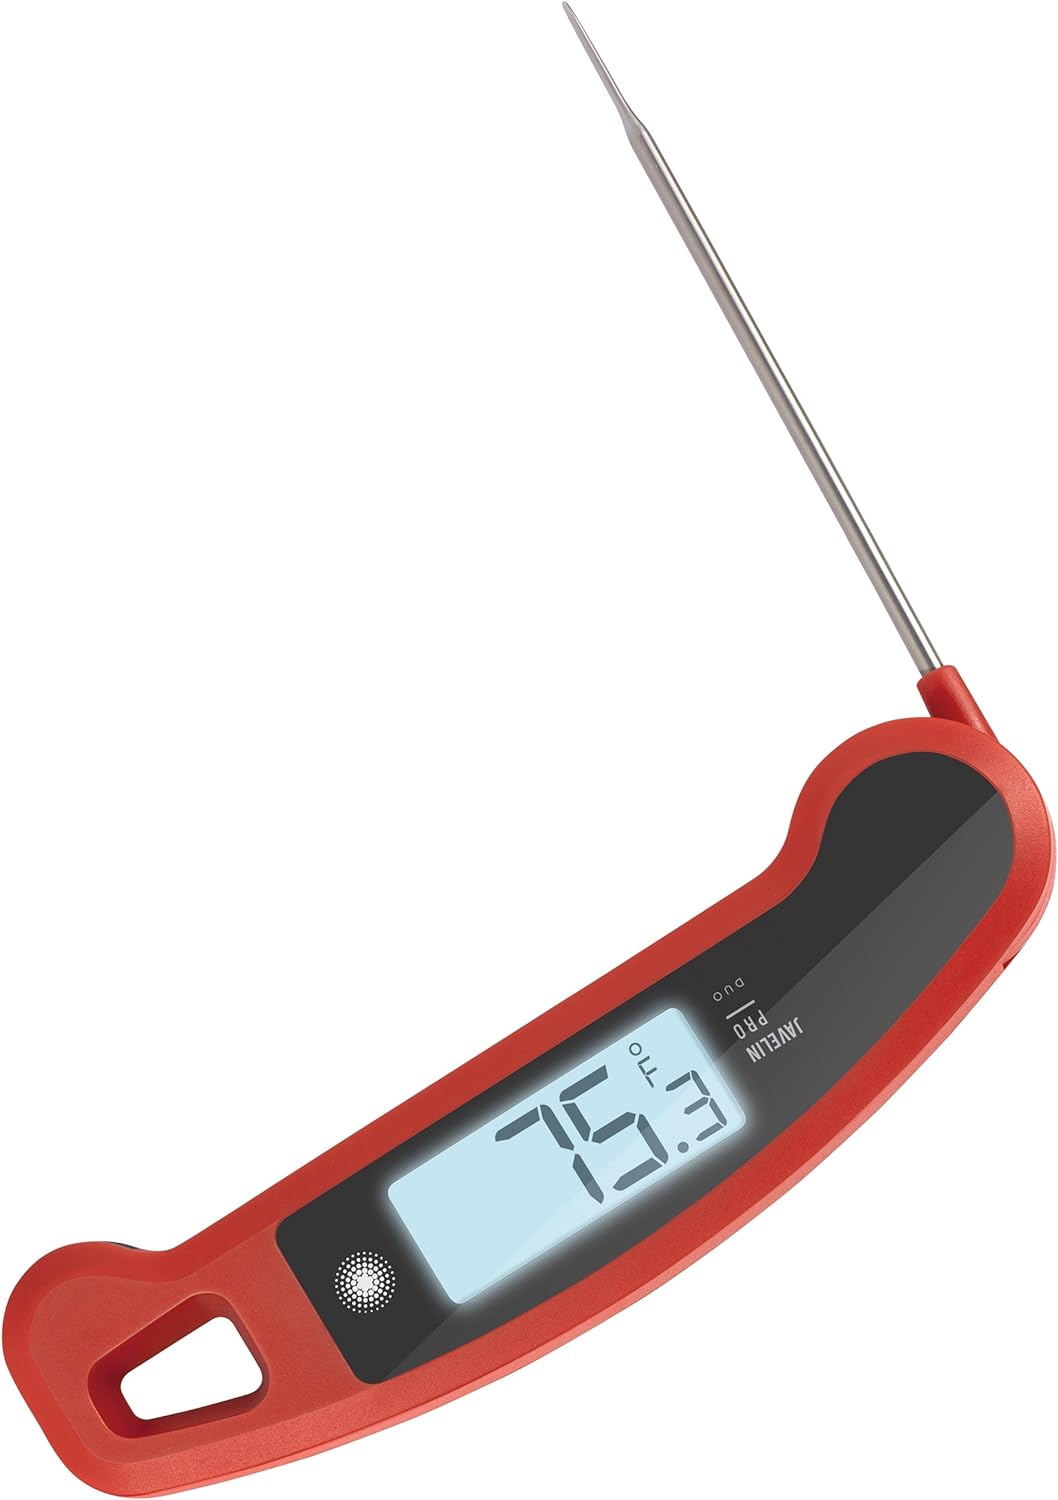 Lavatools PX1D Javelin PRO Duo Ultra Fast Professional Digital Instant Read Meat Thermometer for Grill and Cooking, 4.5 Probe, Auto-Rotating Backlit Display, Splash Resistant – Sambal